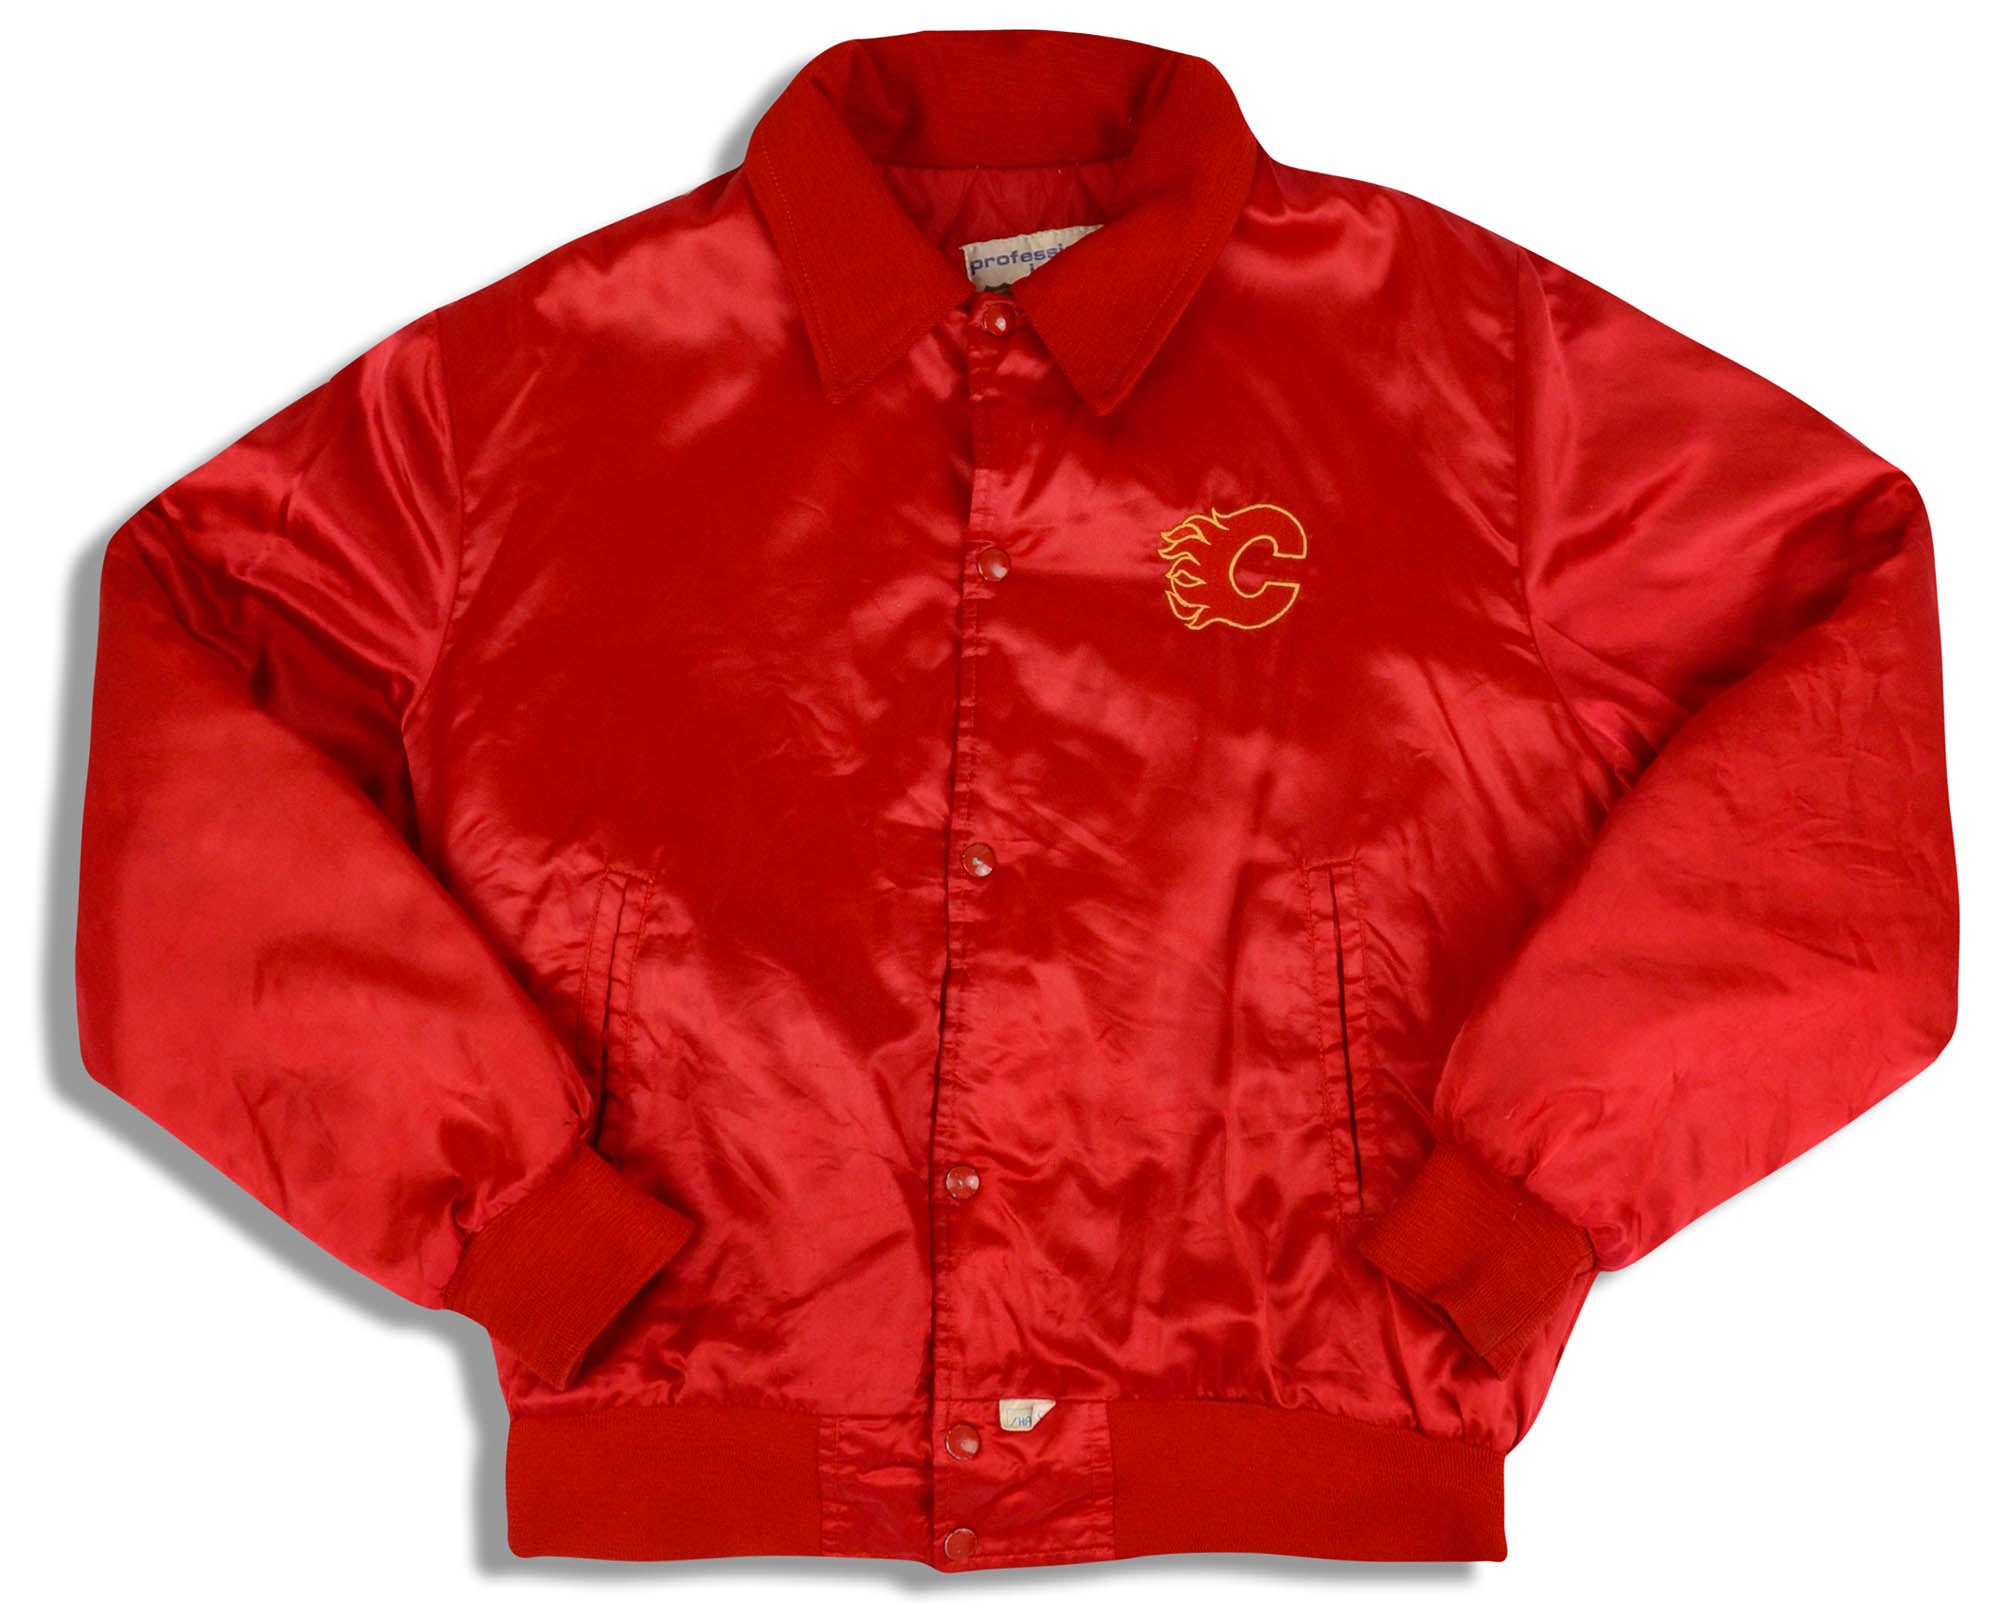 VINTAGE CALGARY FLAMES JACKET - Big Valley Auction